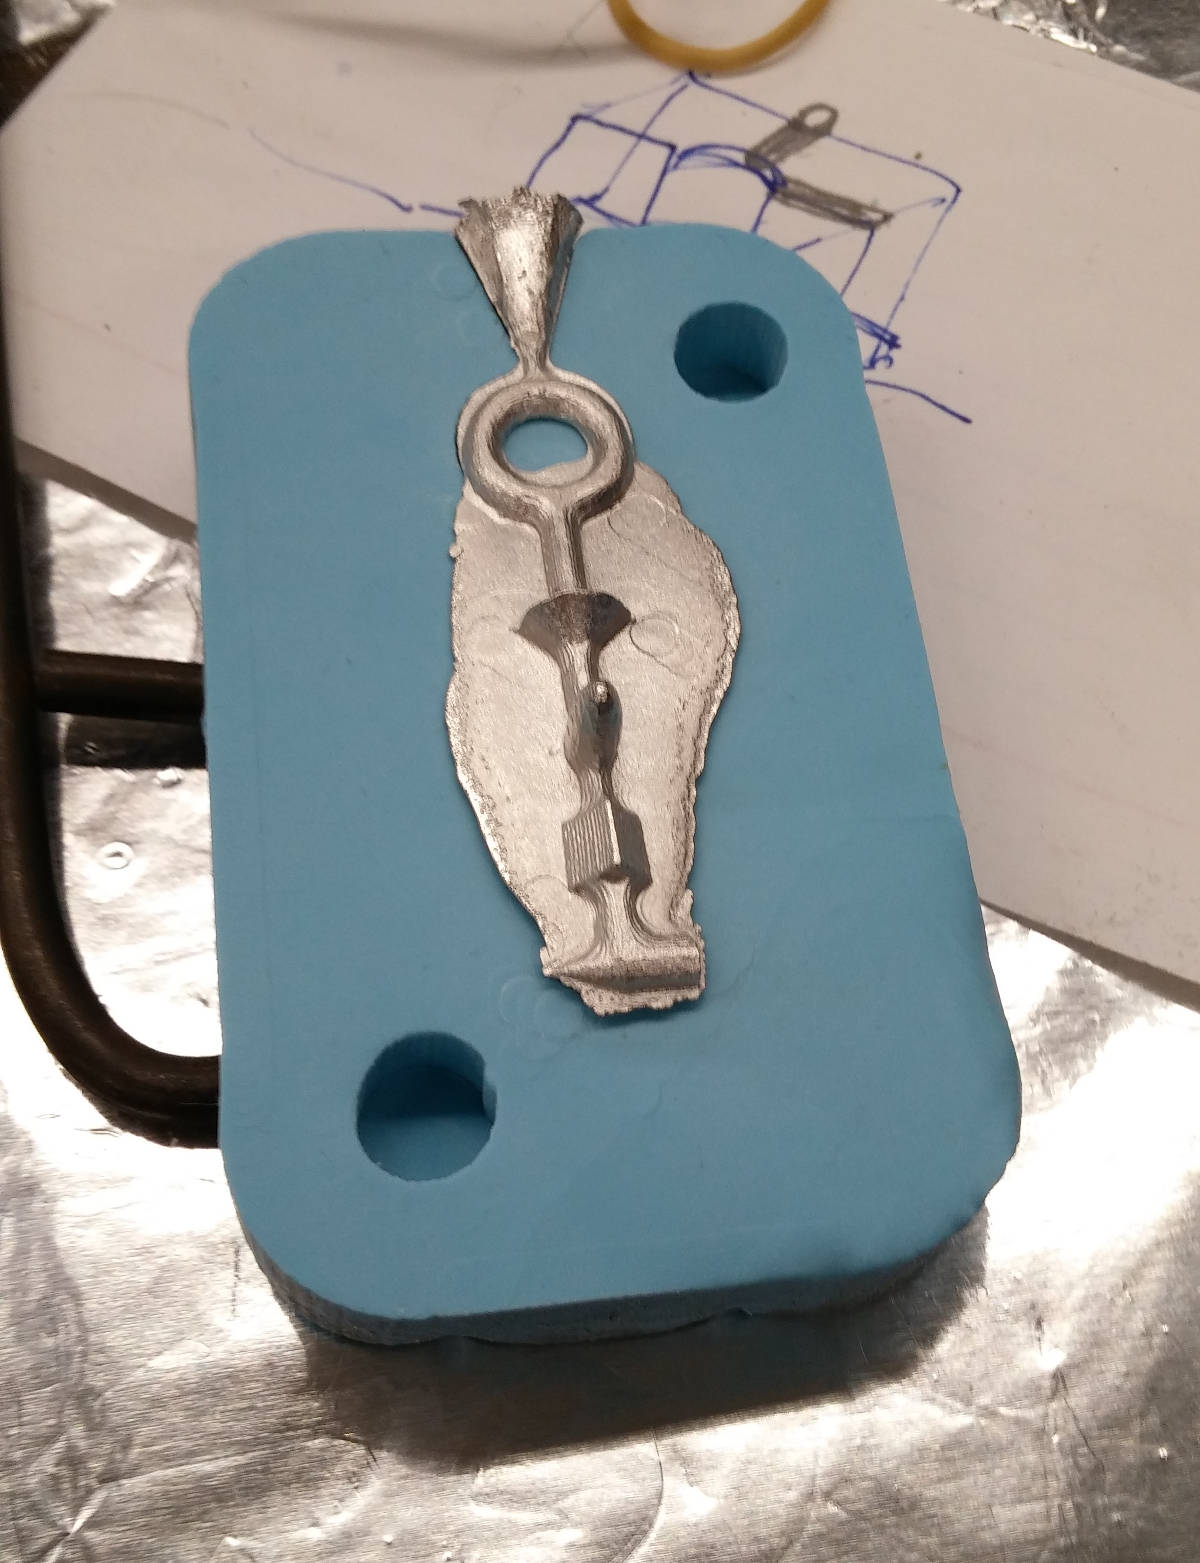 Photo of the key in one side of the oomoo mold